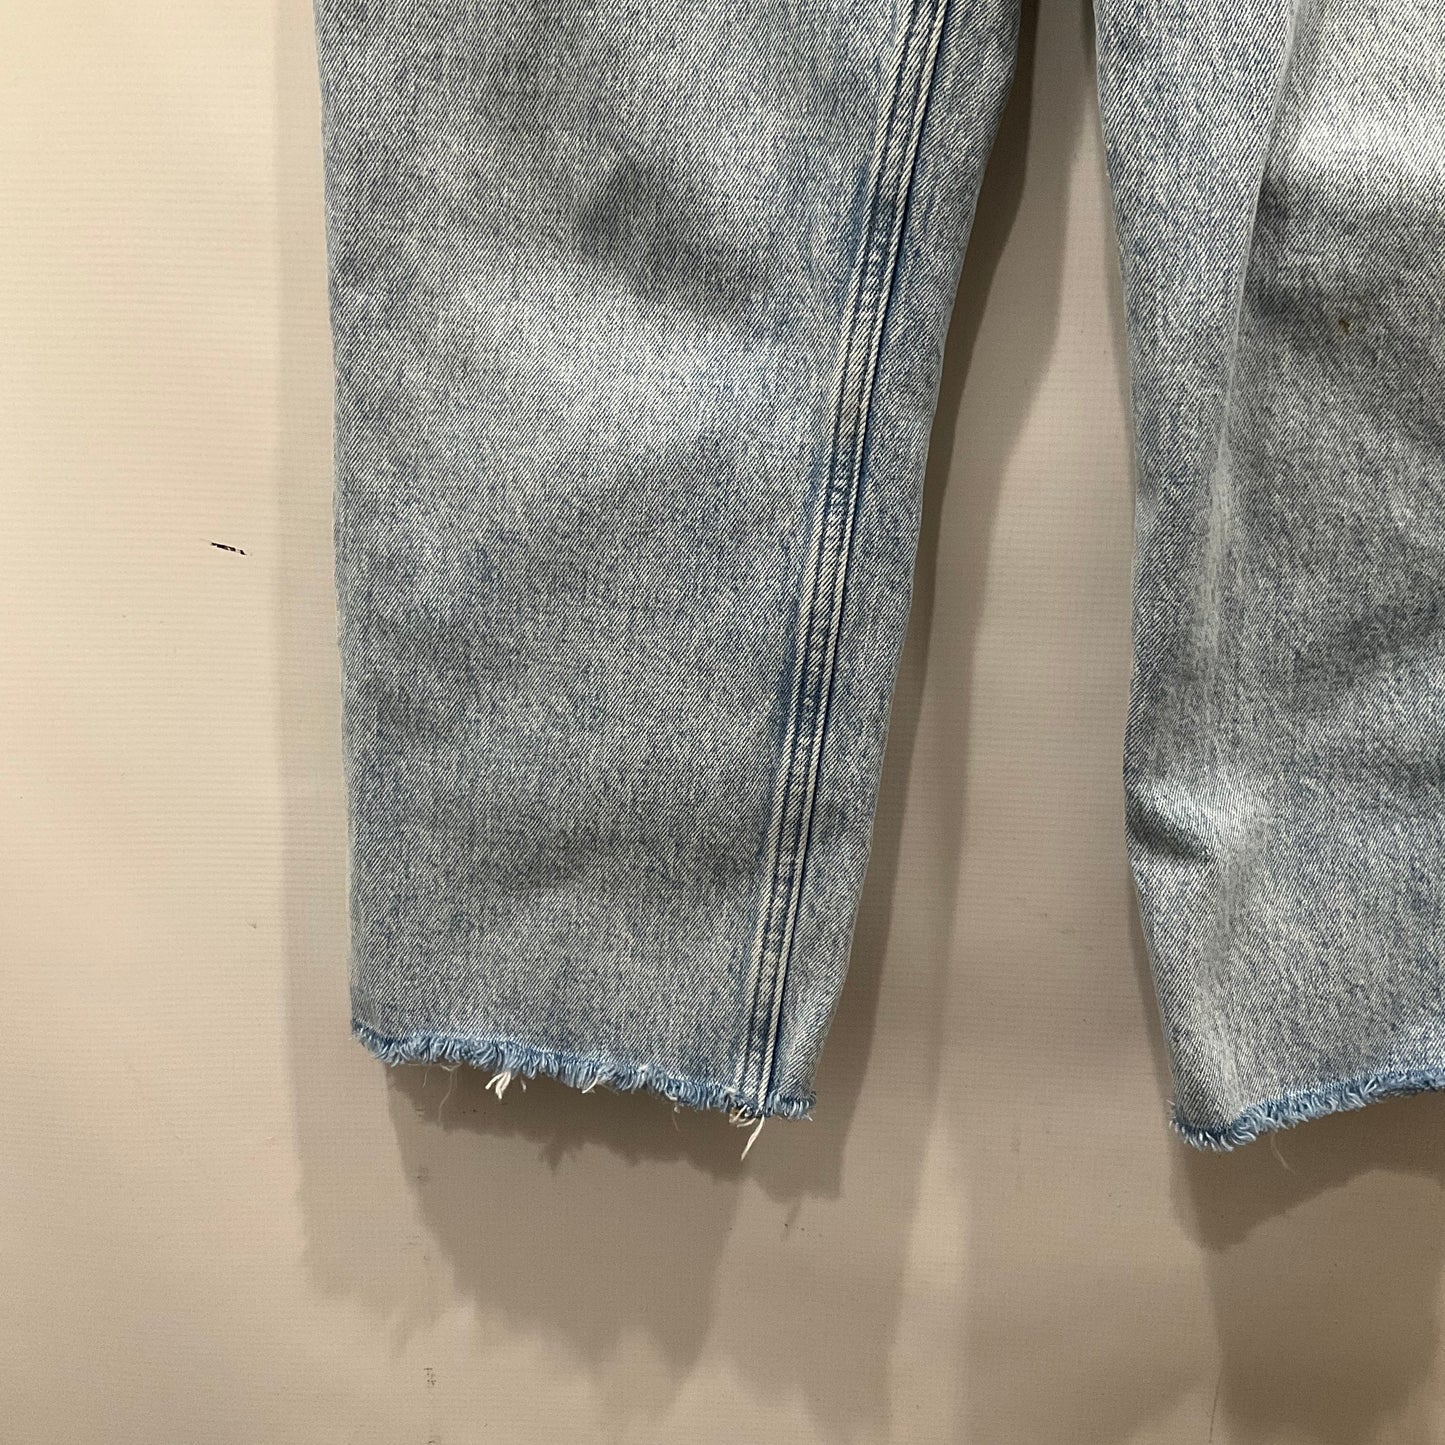 Blue Jeans Straight Abercrombie And Fitch, Size 4